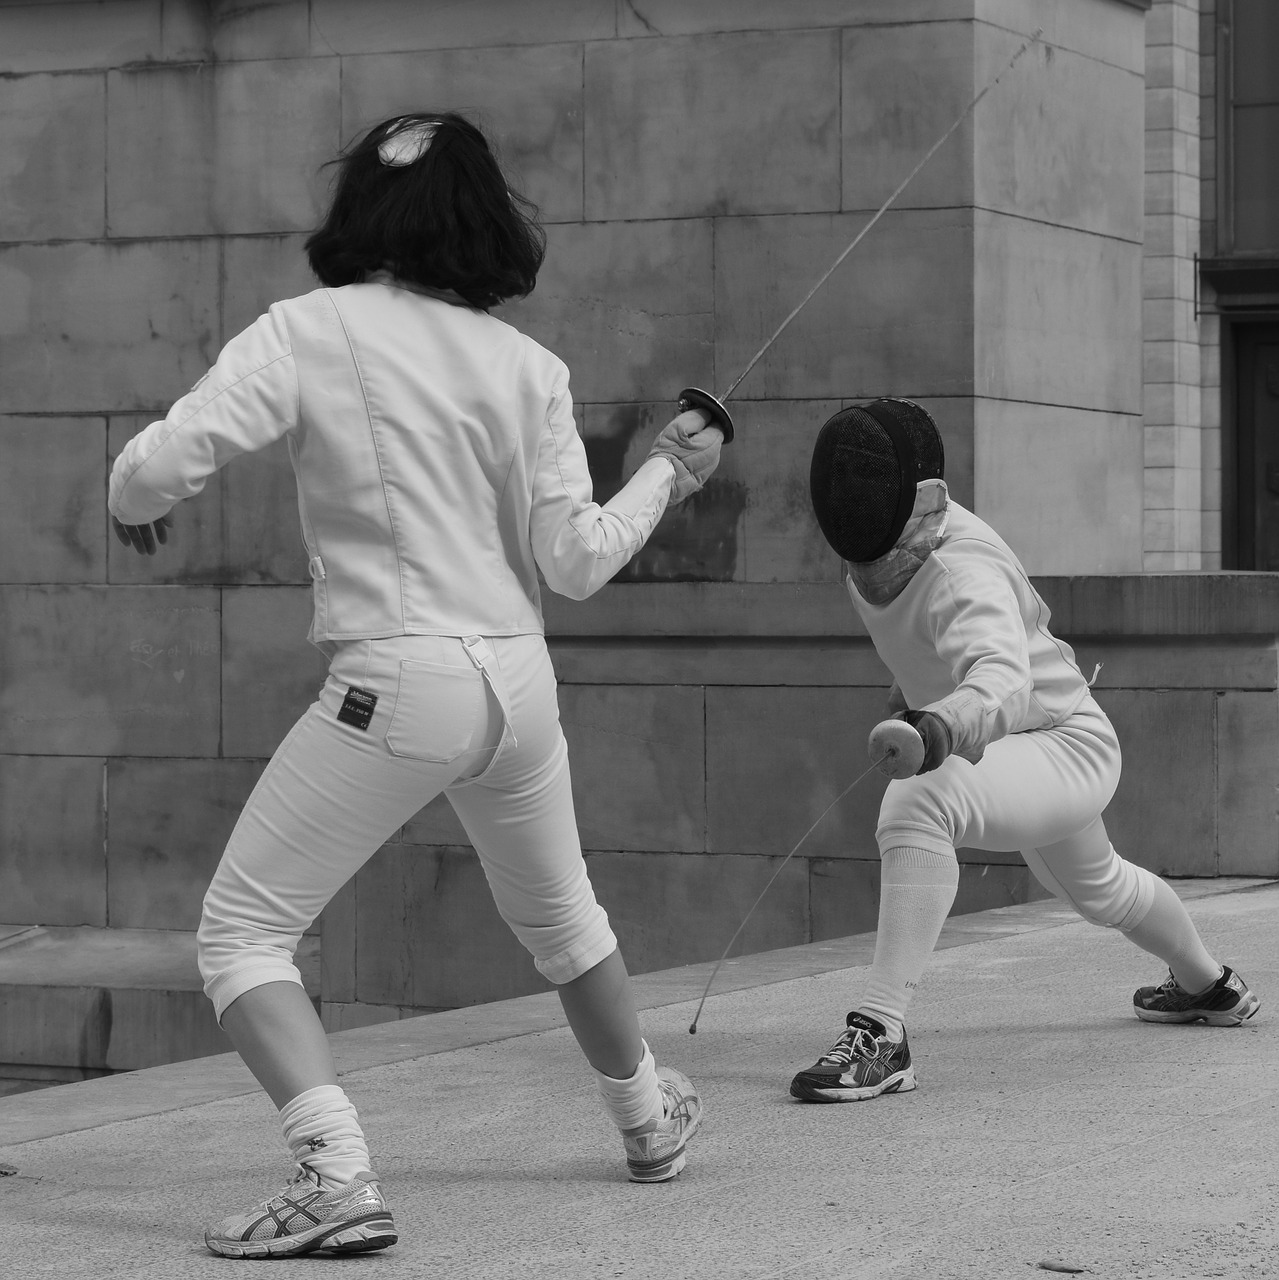 People fencing, one on the attack